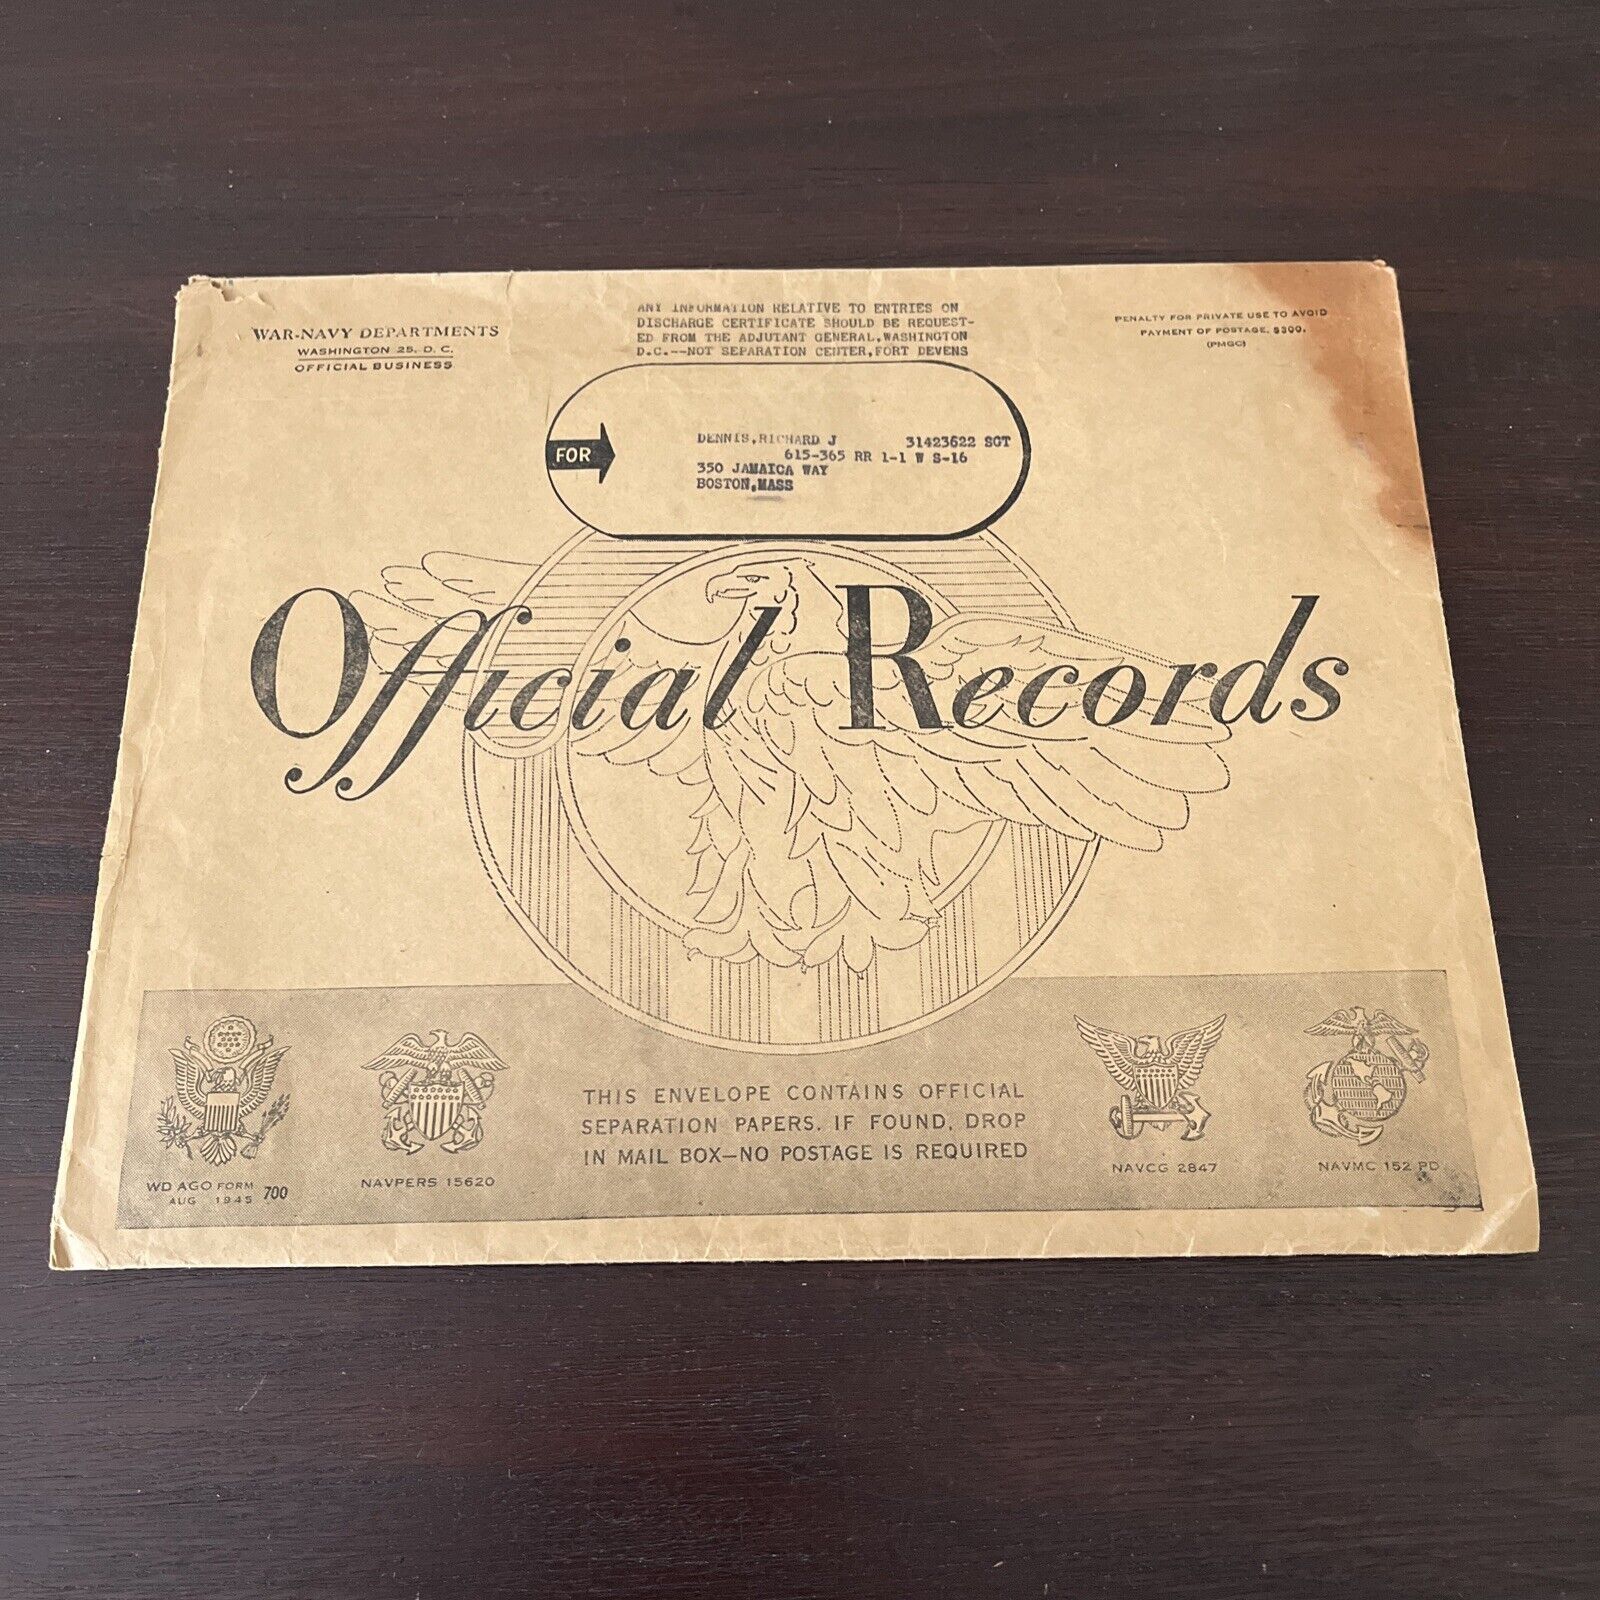 Vtg Official Records Envelope War Navy Department Official Business 1945 WWII